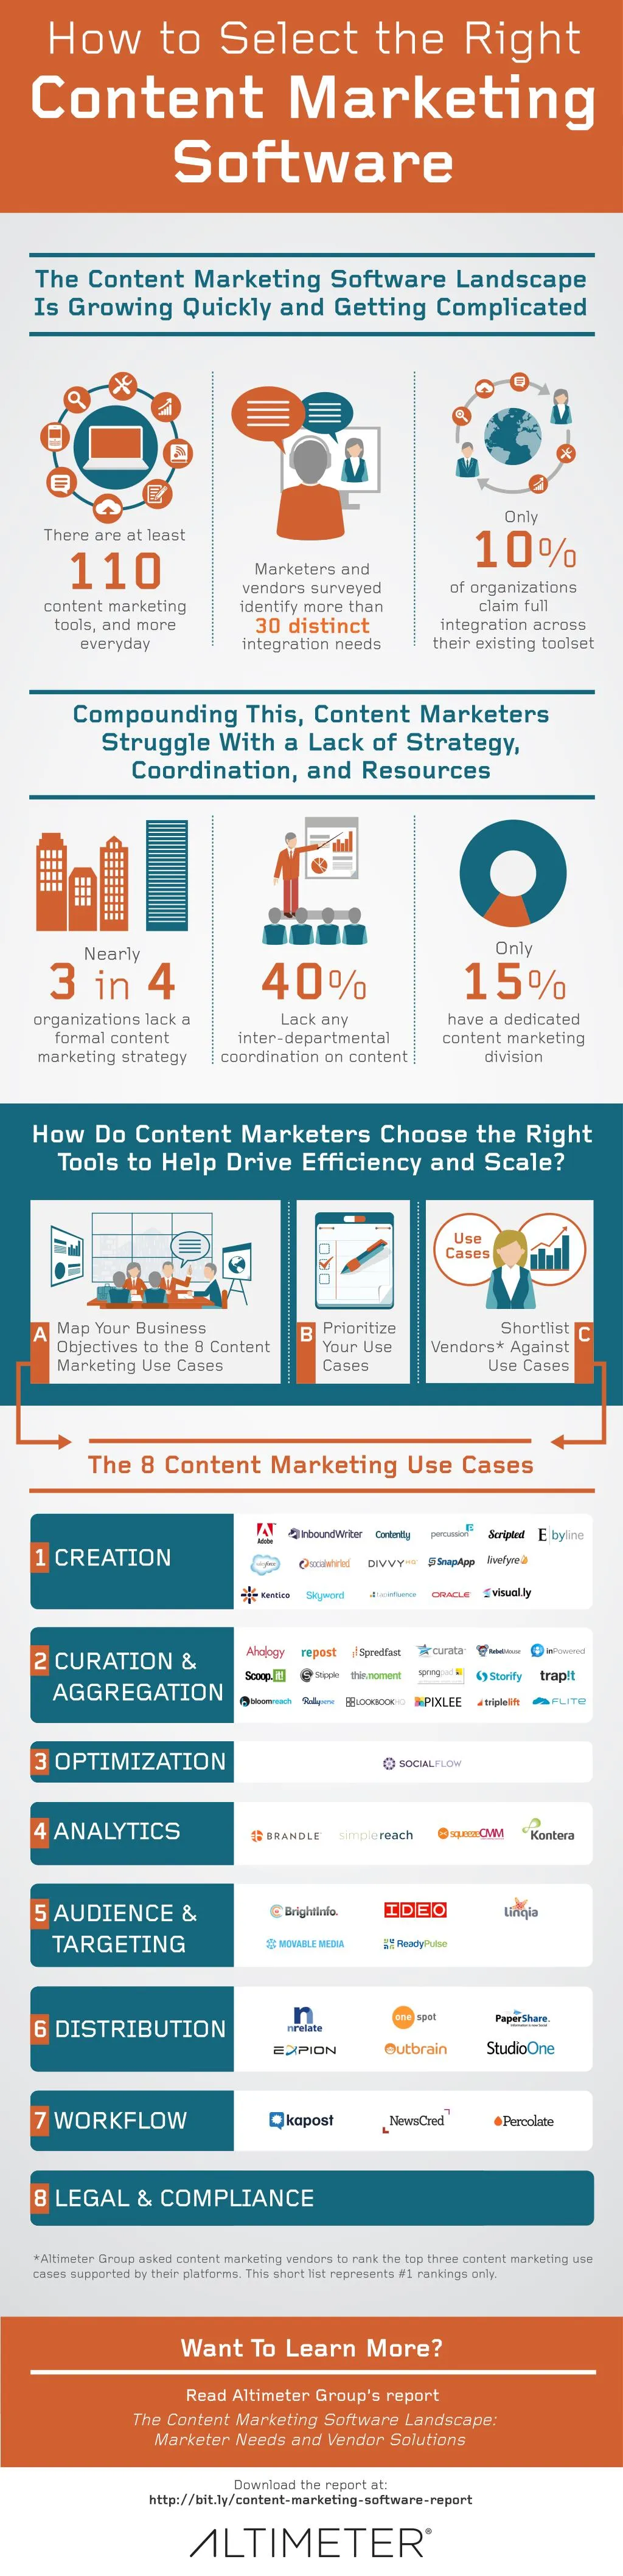 how to select the right content marketing sofware